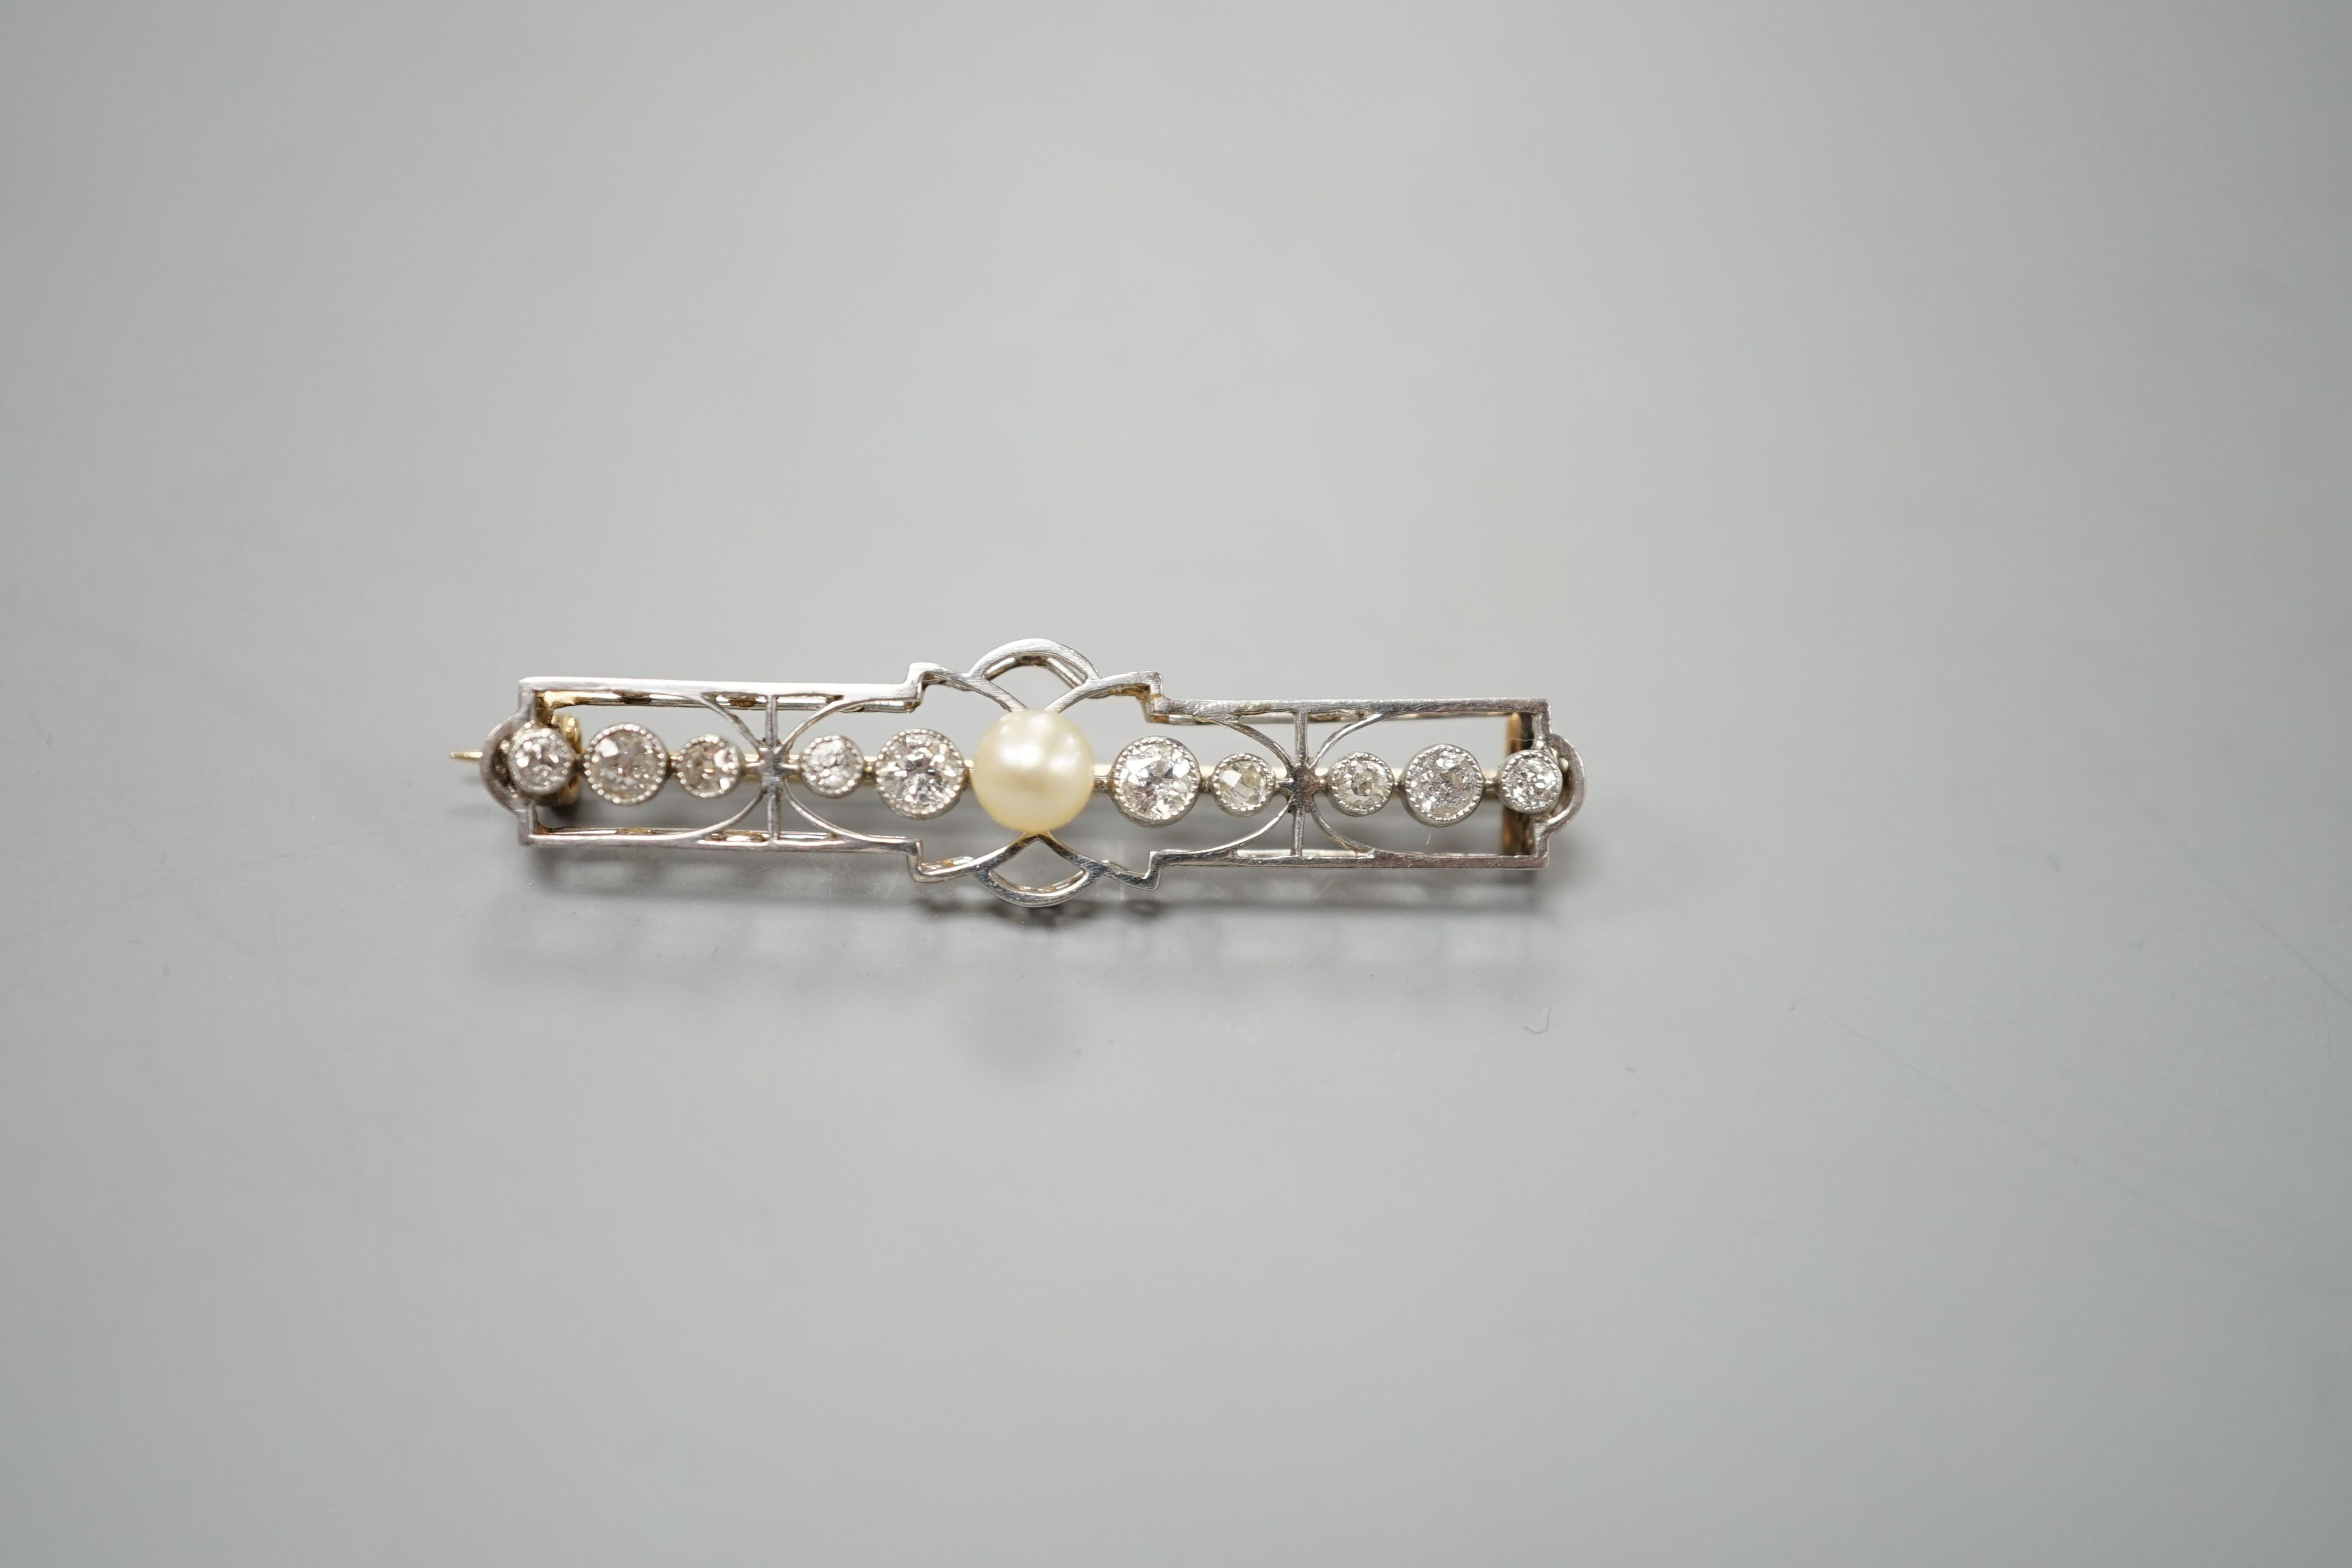 An early 20th century, yellow and white meta, cultured pearl and diamond set open work bar brooch, 41mm, gross weight 3.6 grams.